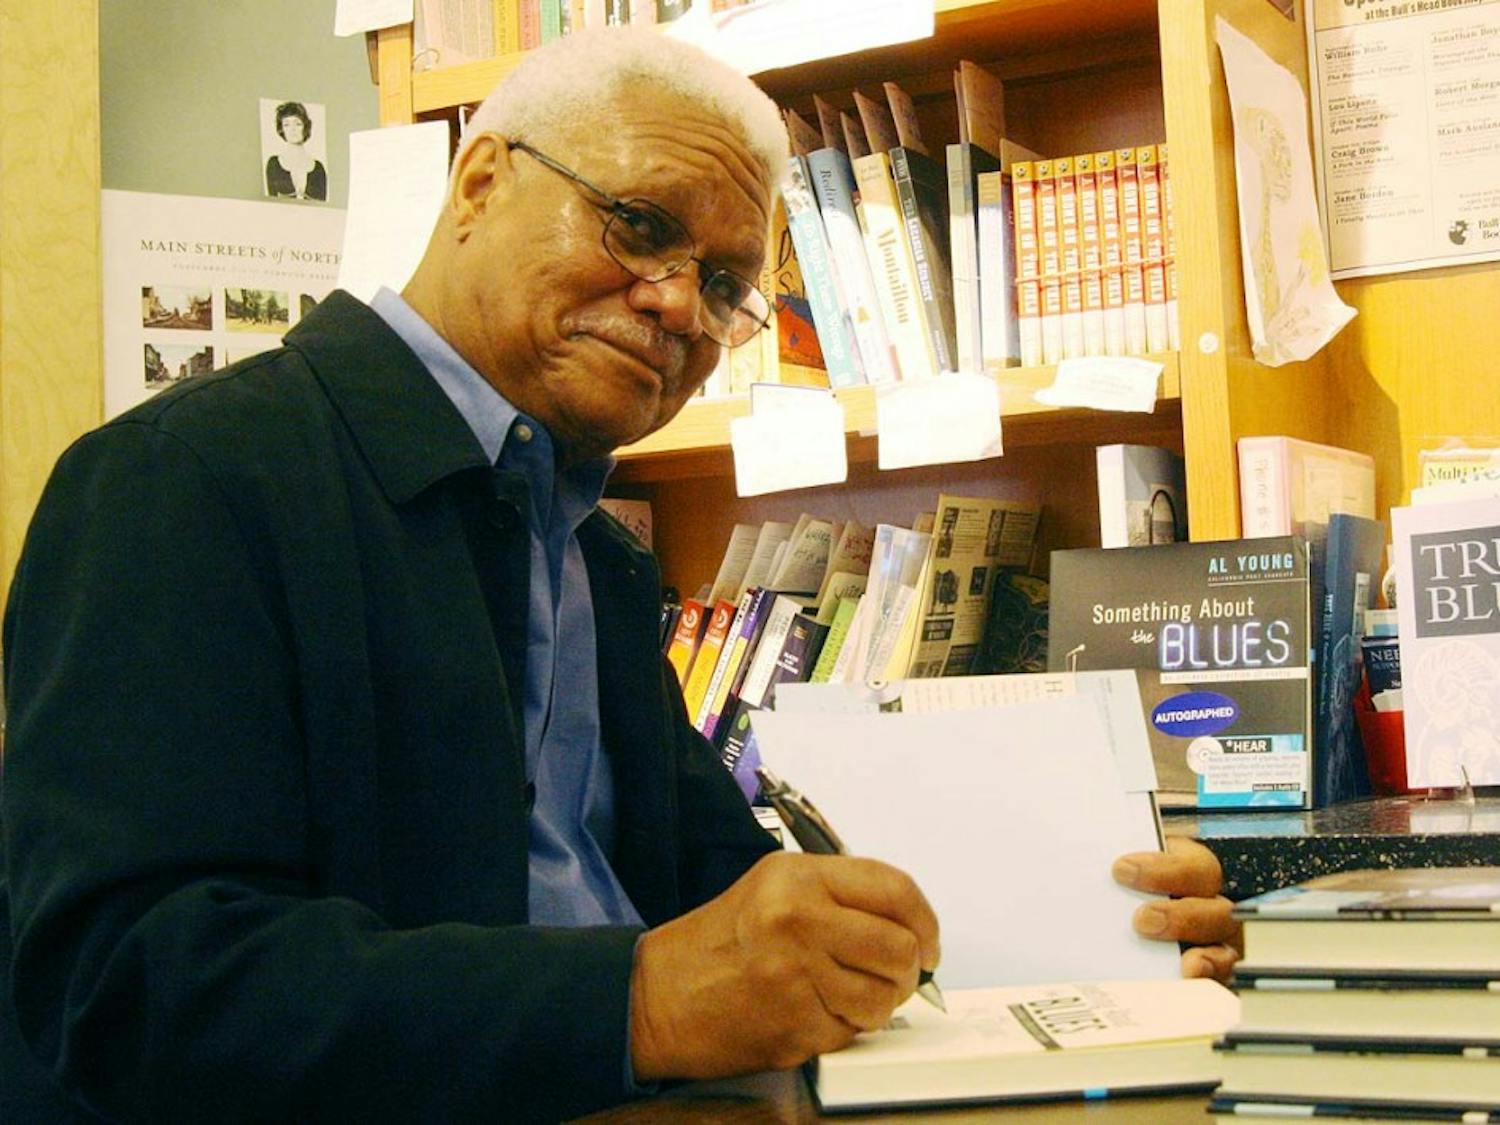 Al Young signs books in the Bull's Head Bookshop